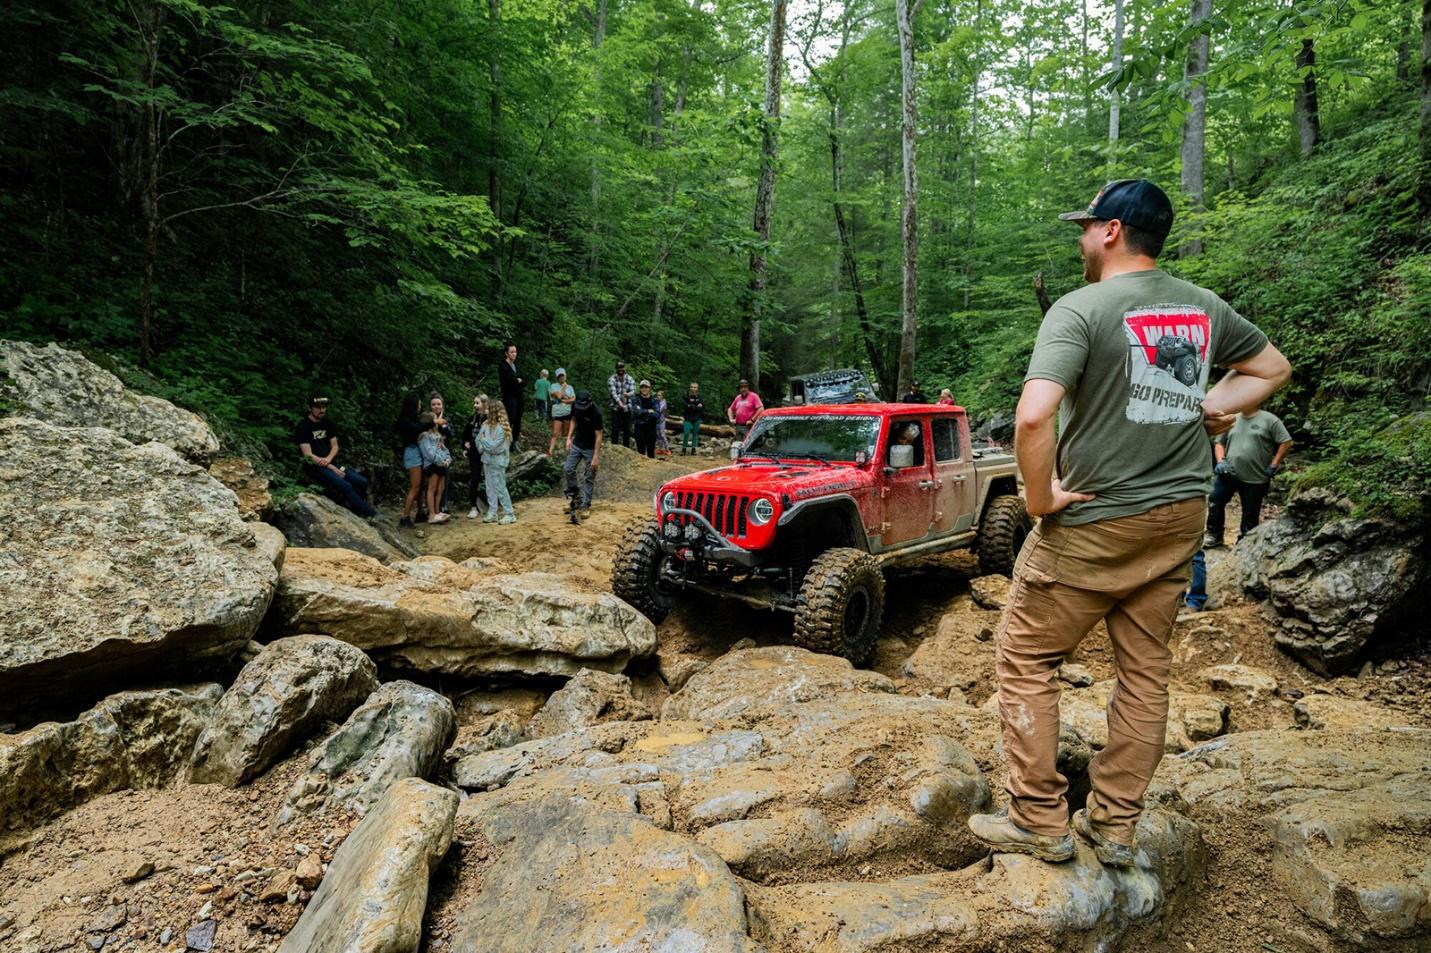 People watching a Jeep at an off-roading event 